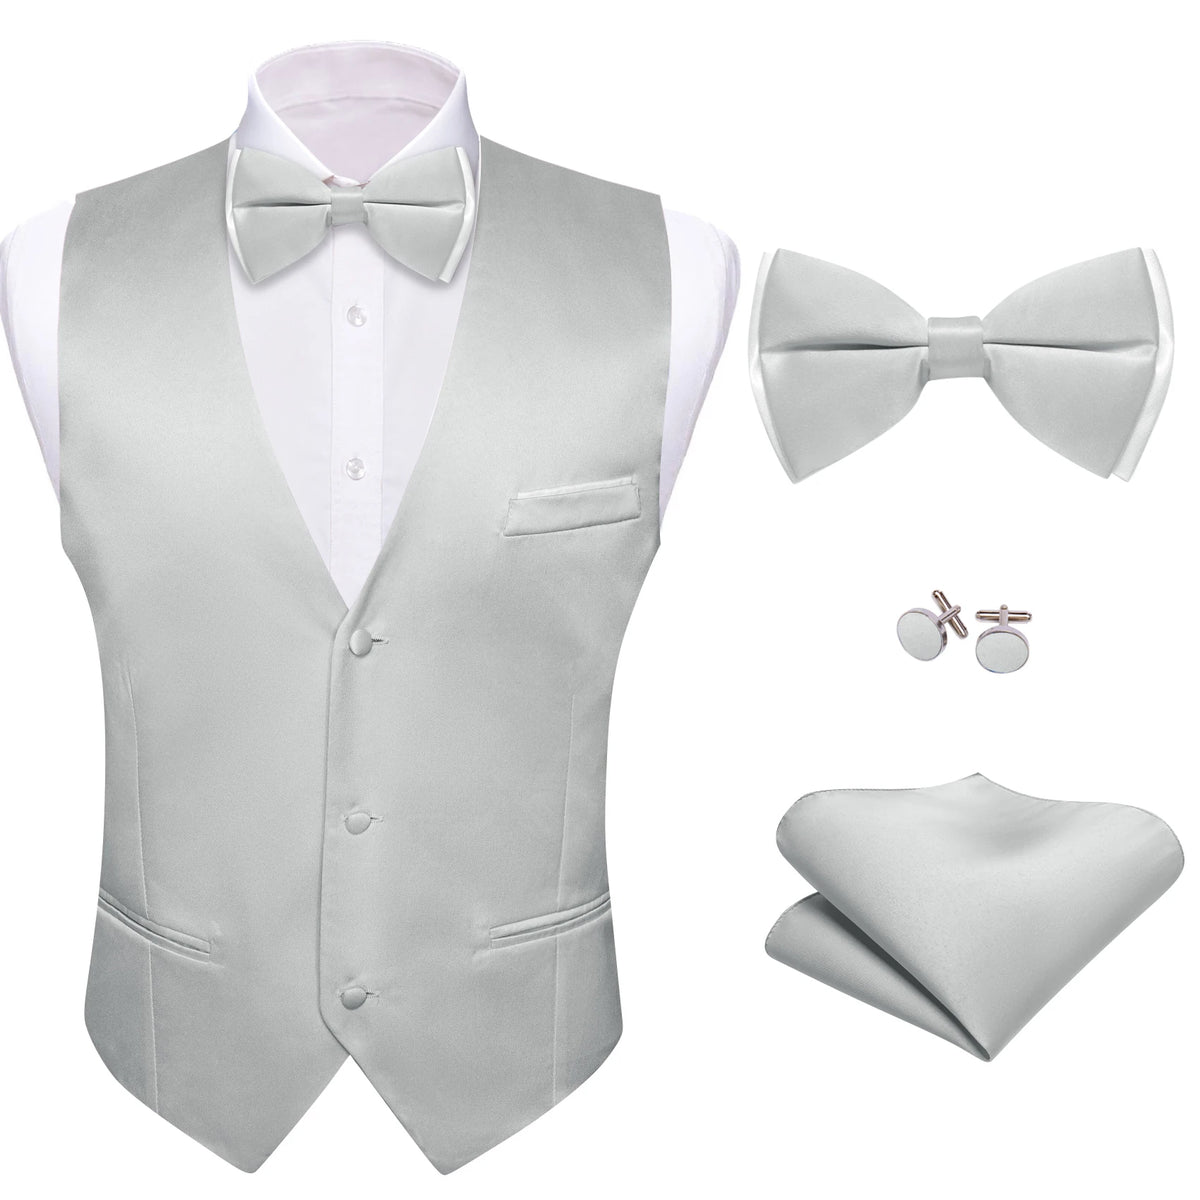 a white suit with a bow tie and cufflinks